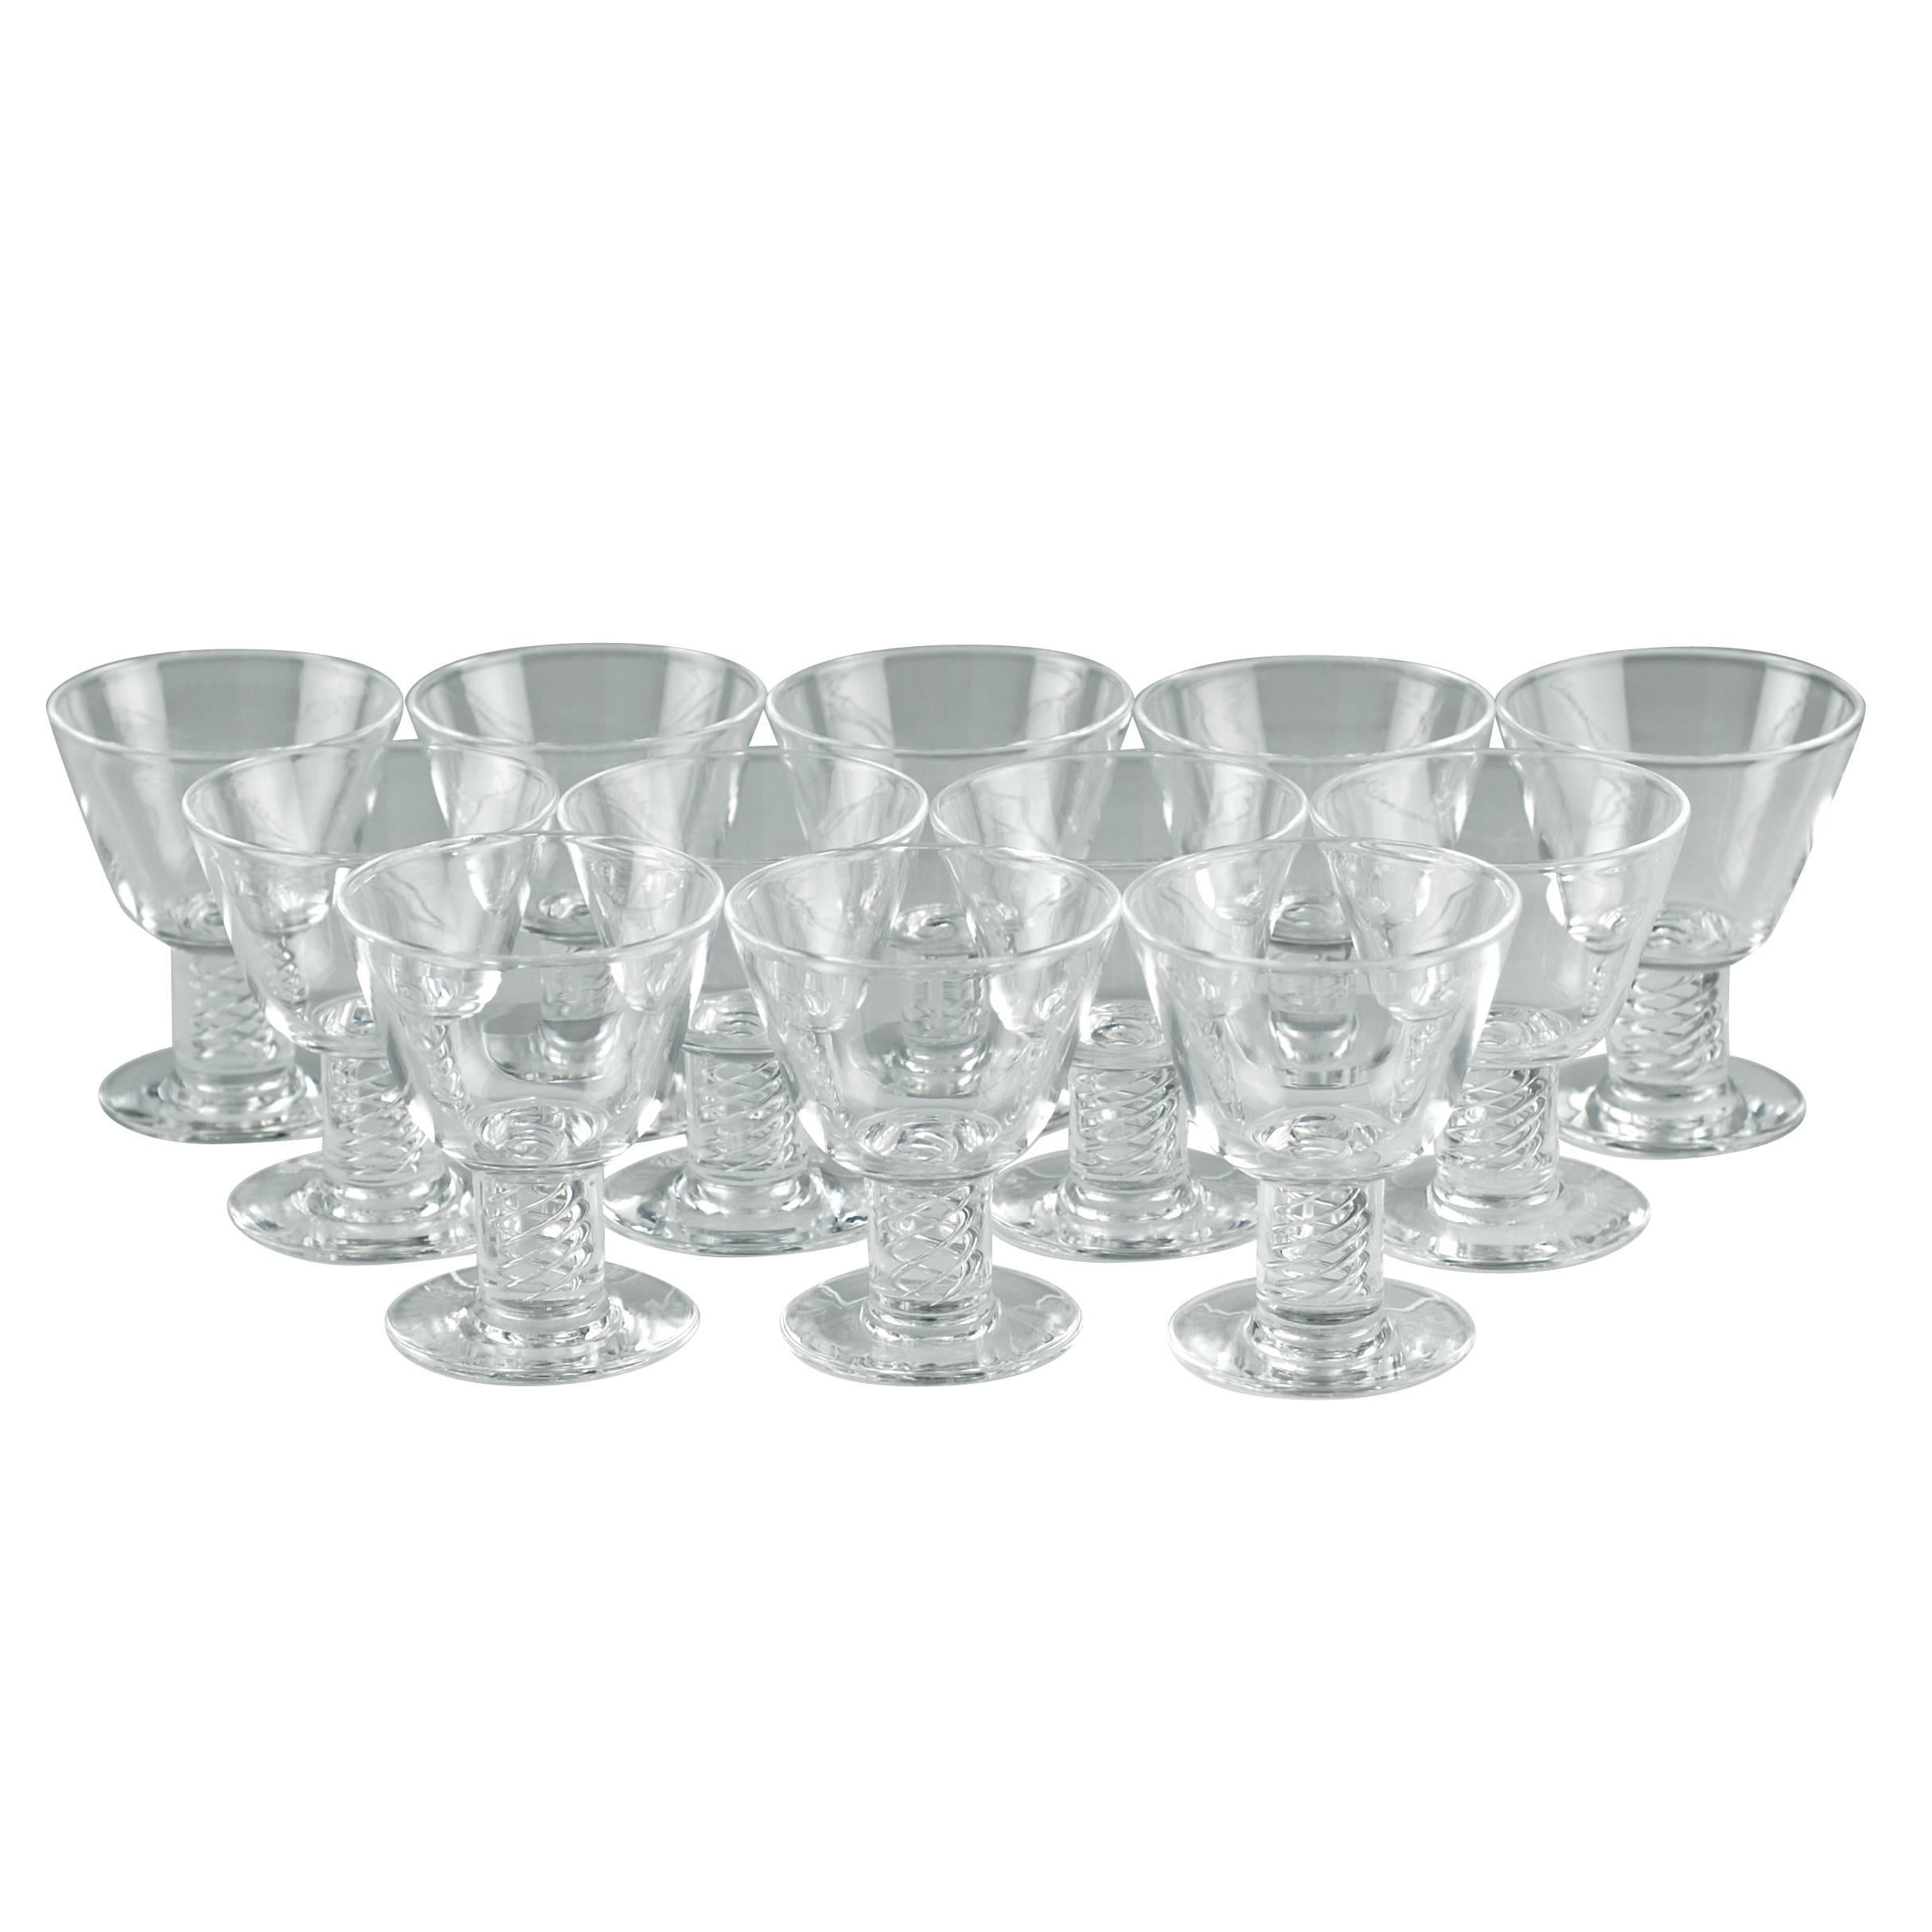 George Thompson for Steuben Air Twist Cocktail Glasses, Set of 12 in Shape 7917